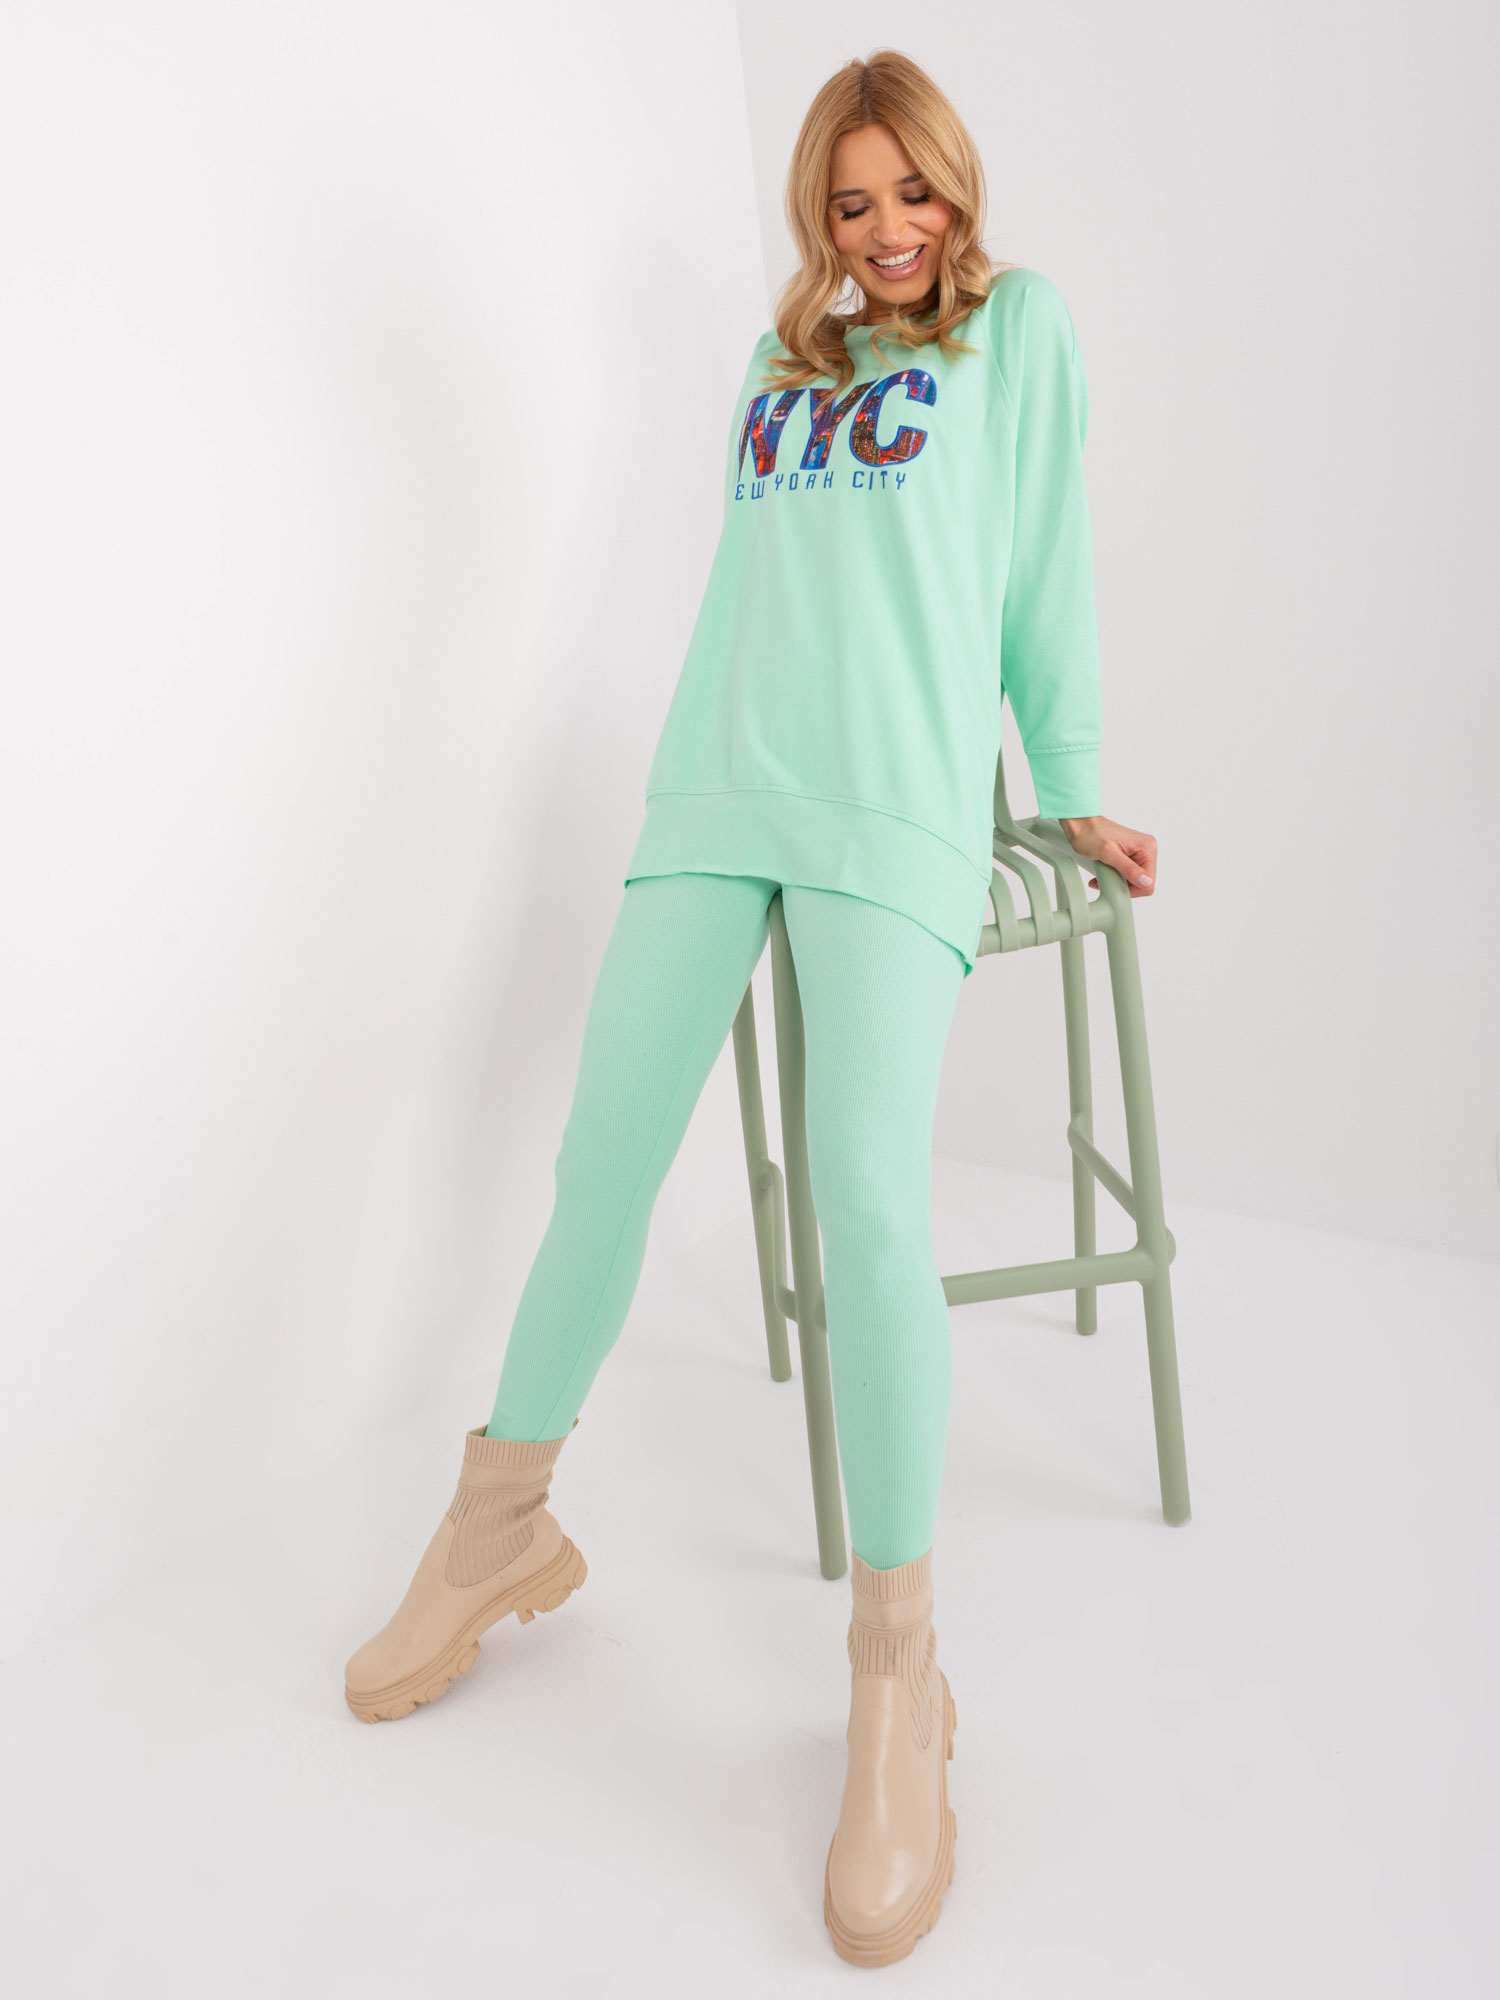 Mint casual set with a sweatshirt with an inscription